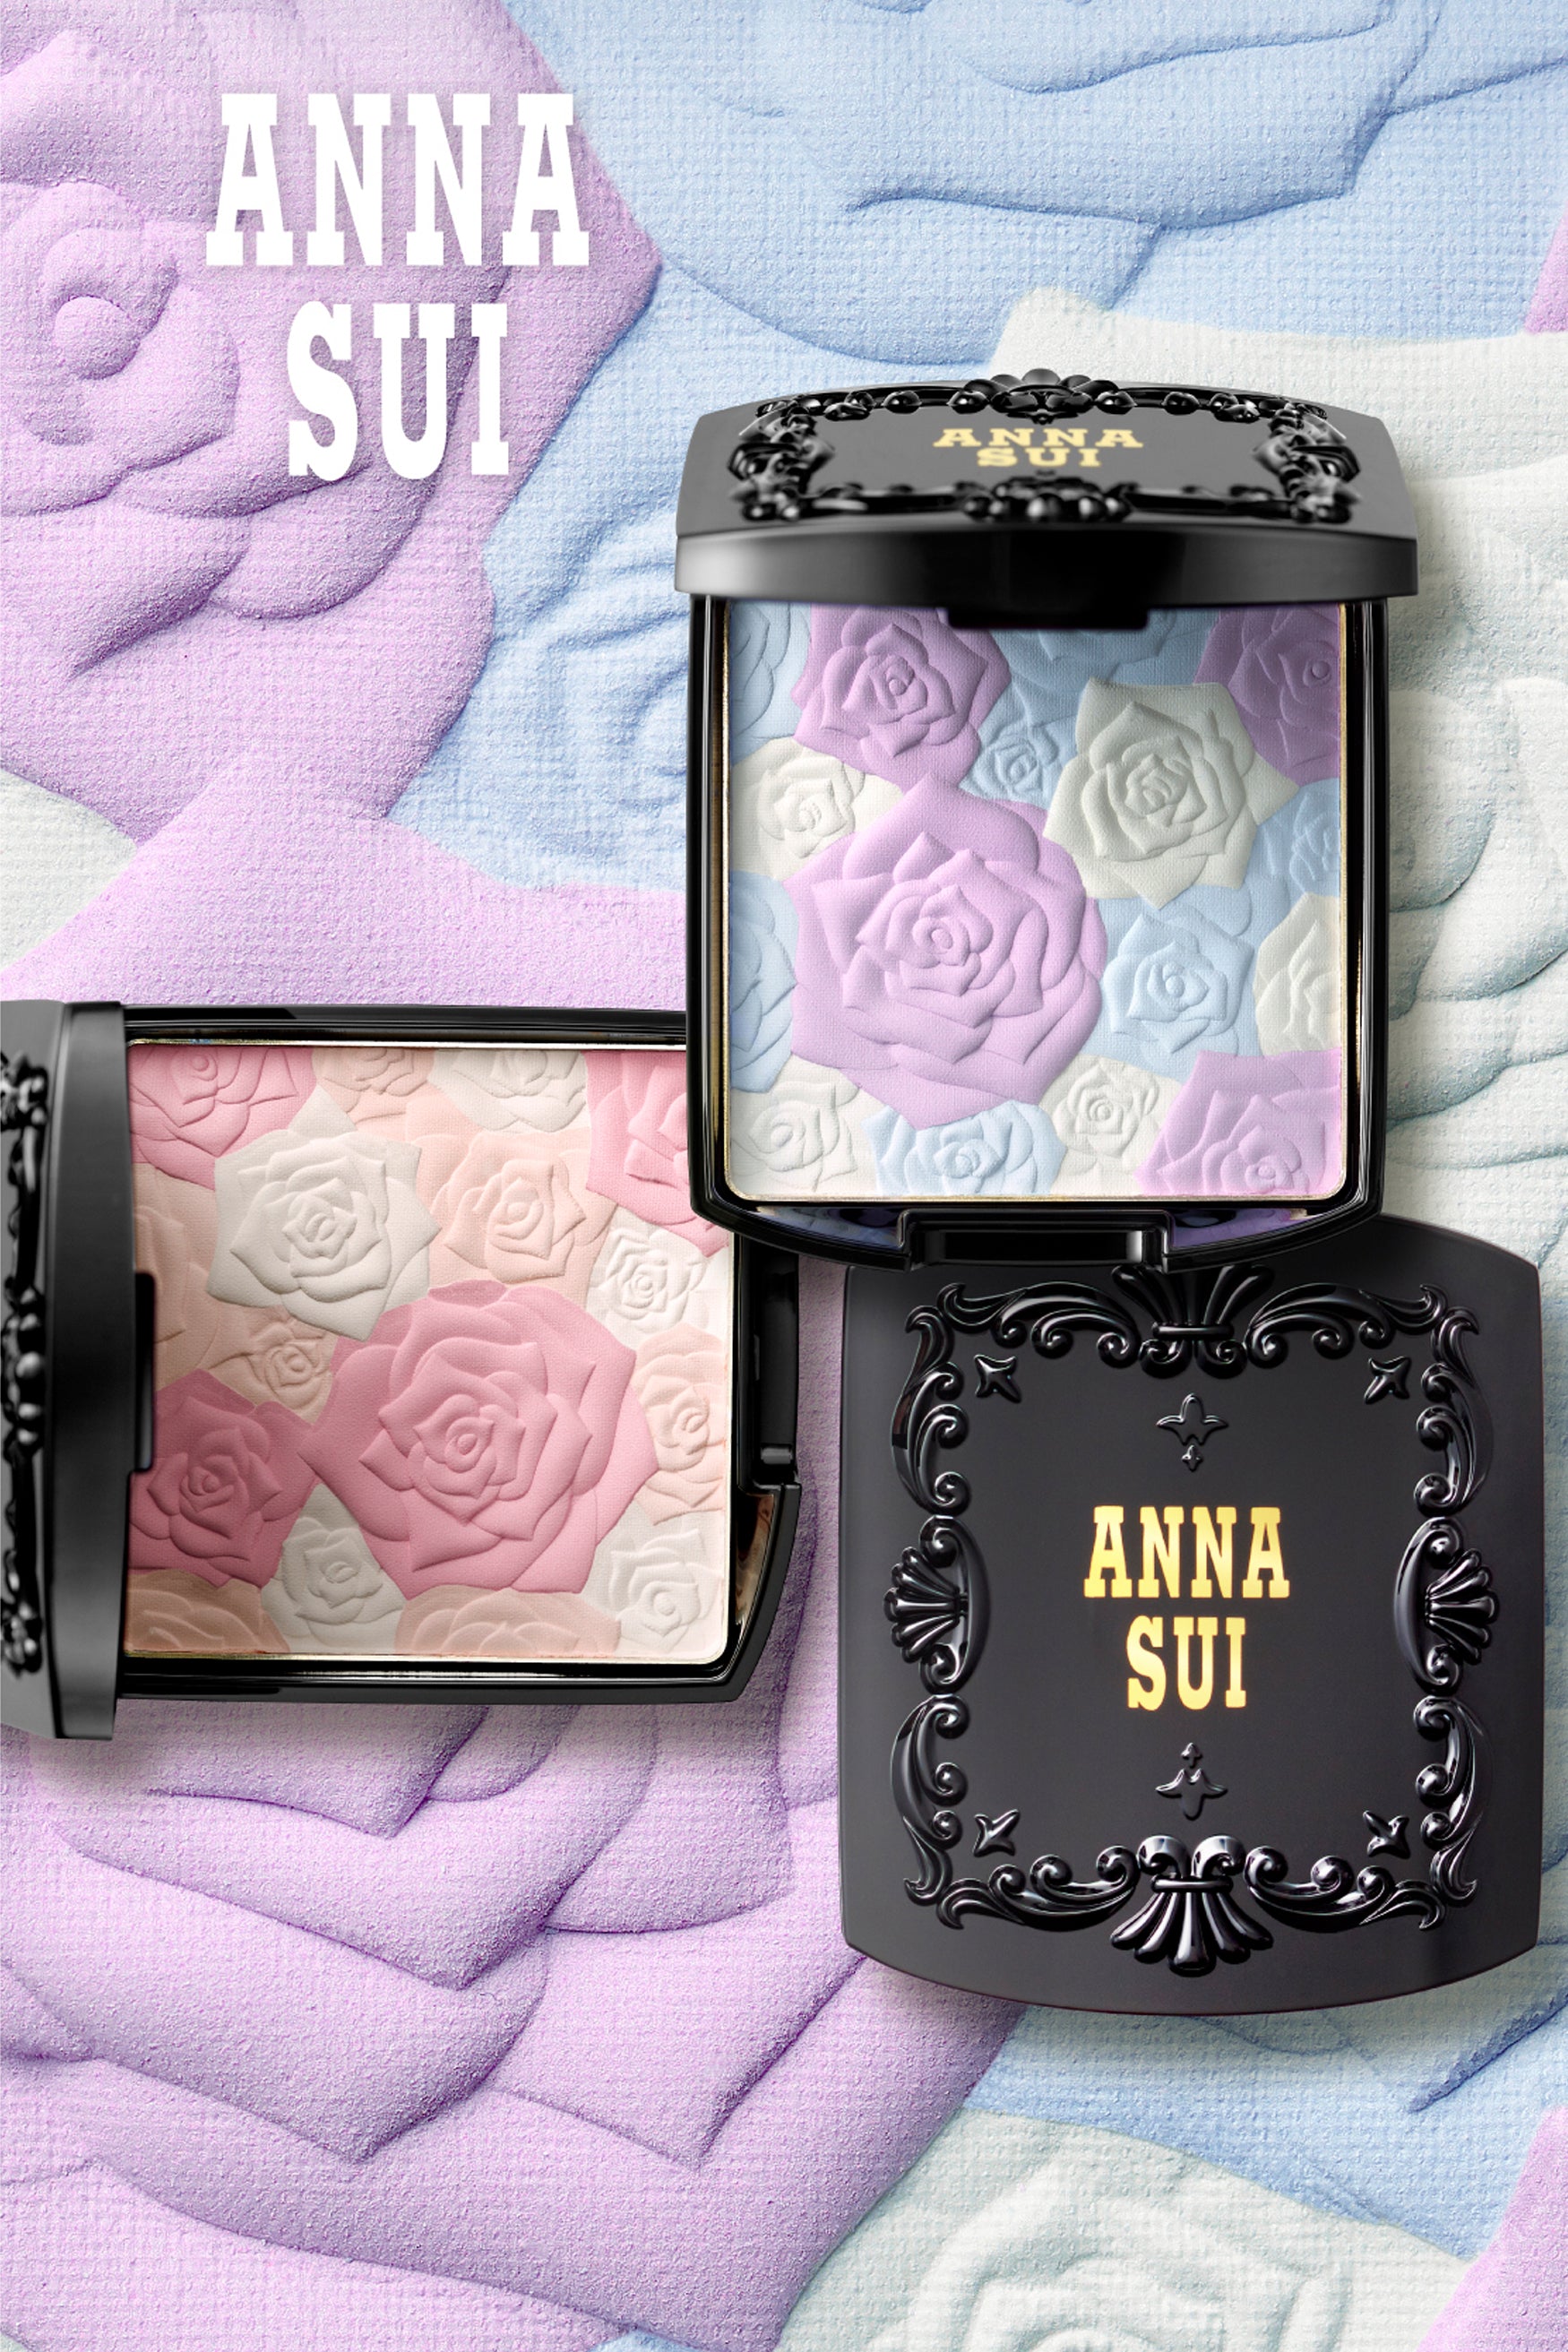 Bouquet of 3-Anna Sui Rose Pressed Powder in black boxes with floral design and gold AS label